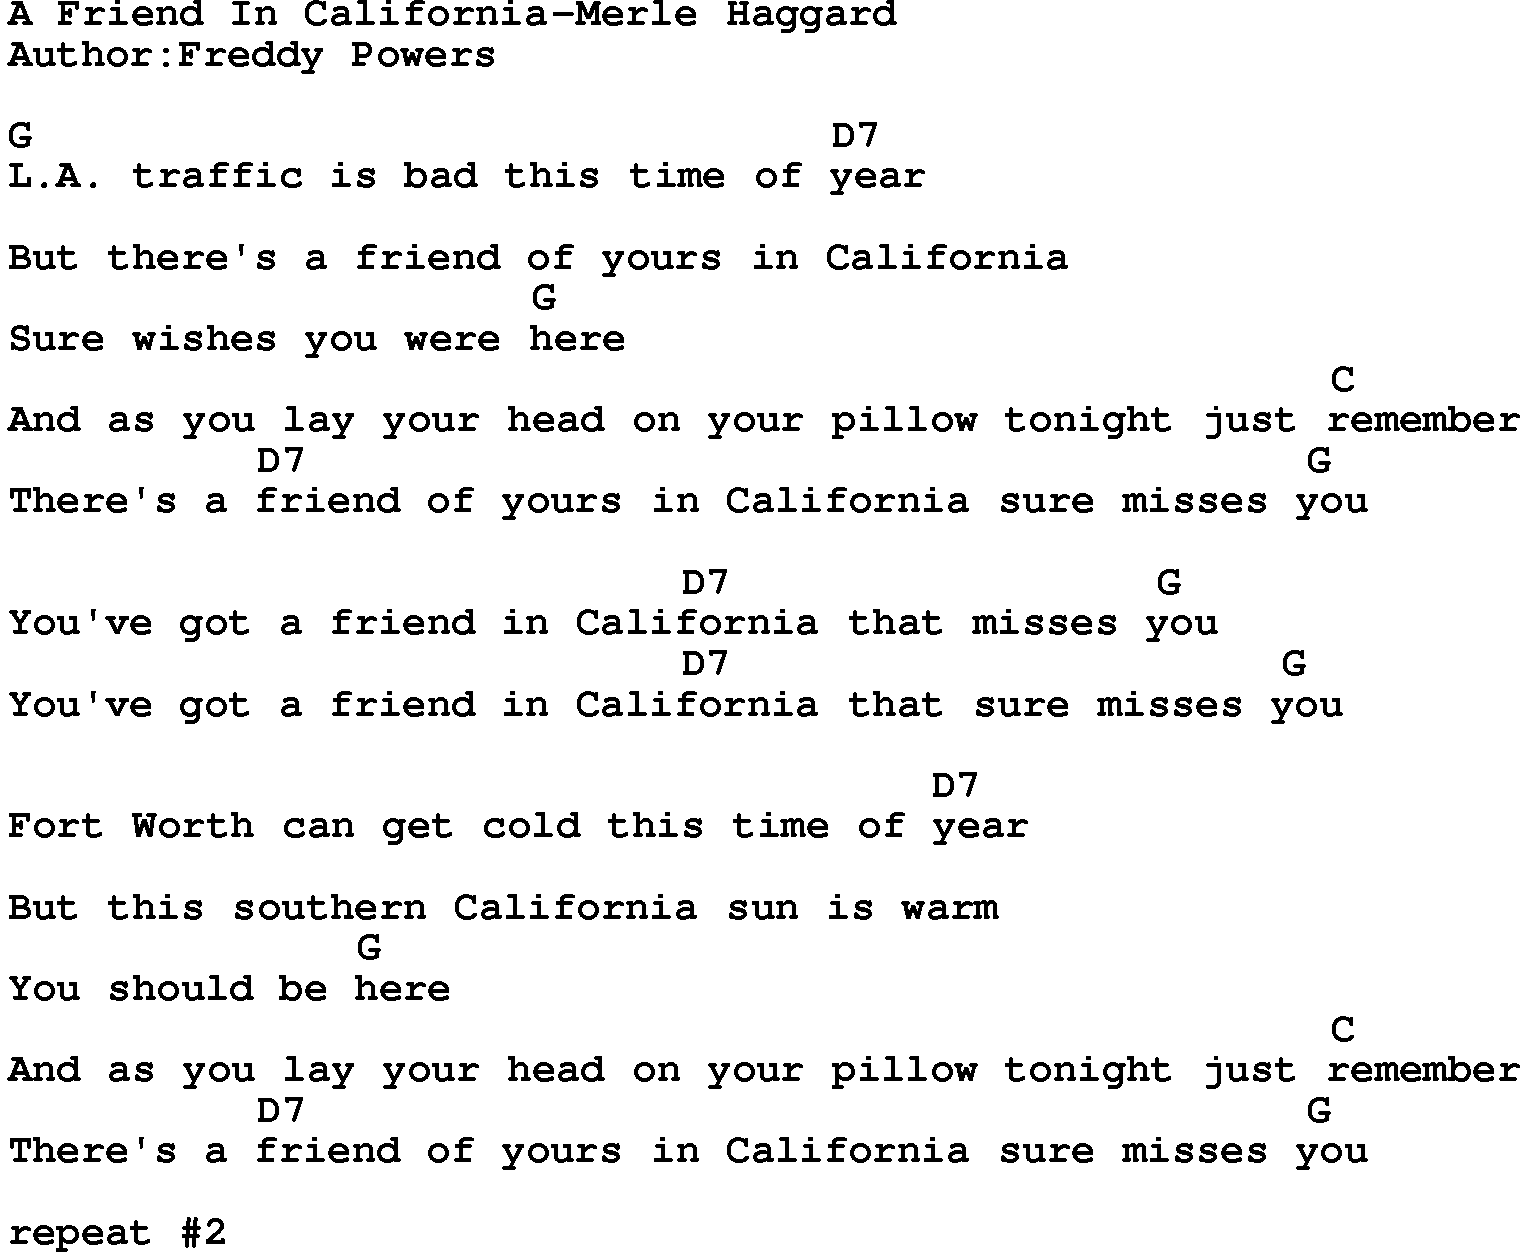 Country music song: A Friend In California-Merle Haggard lyrics and chords